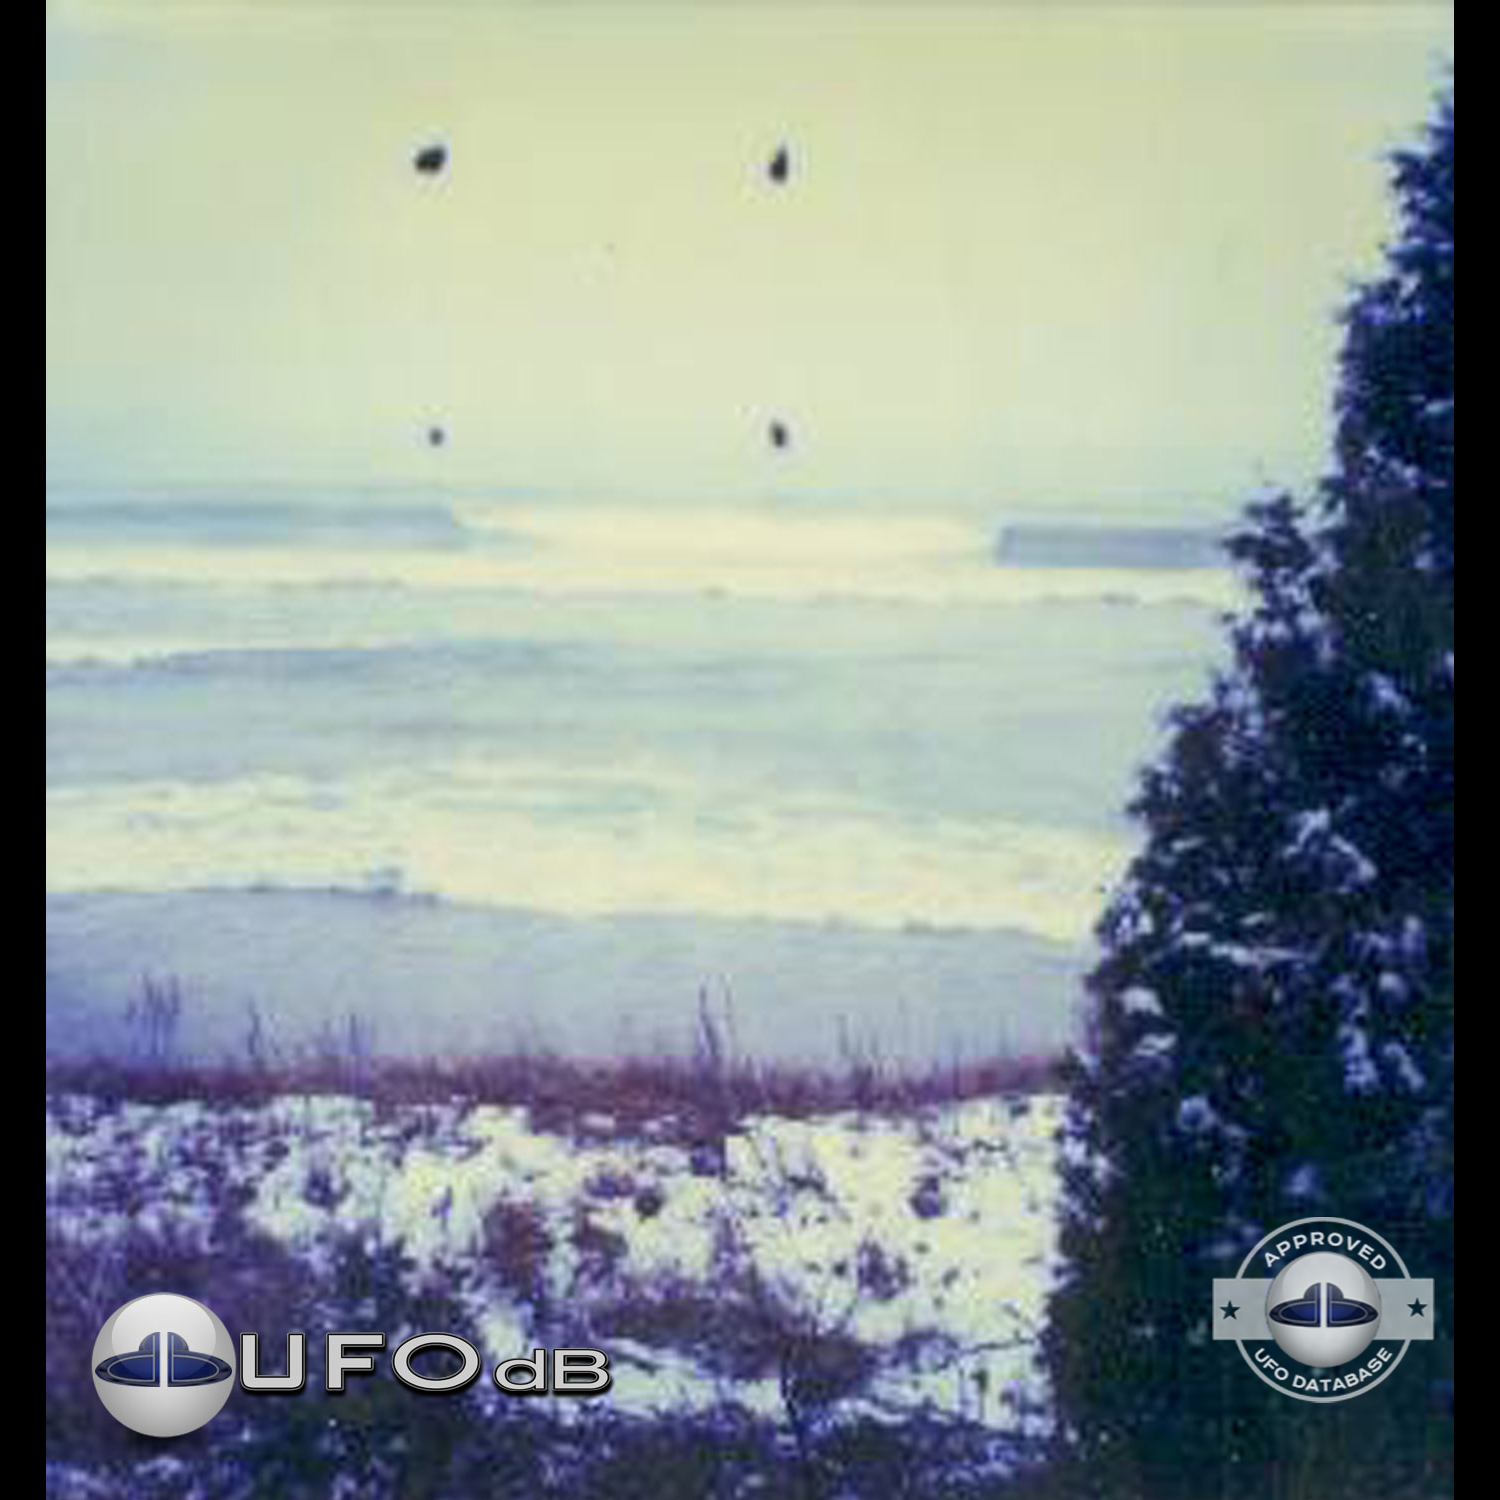 Lake Michigan Sighting of 4 ufos in a square formation - Winter 1985 UFO Picture #92-1